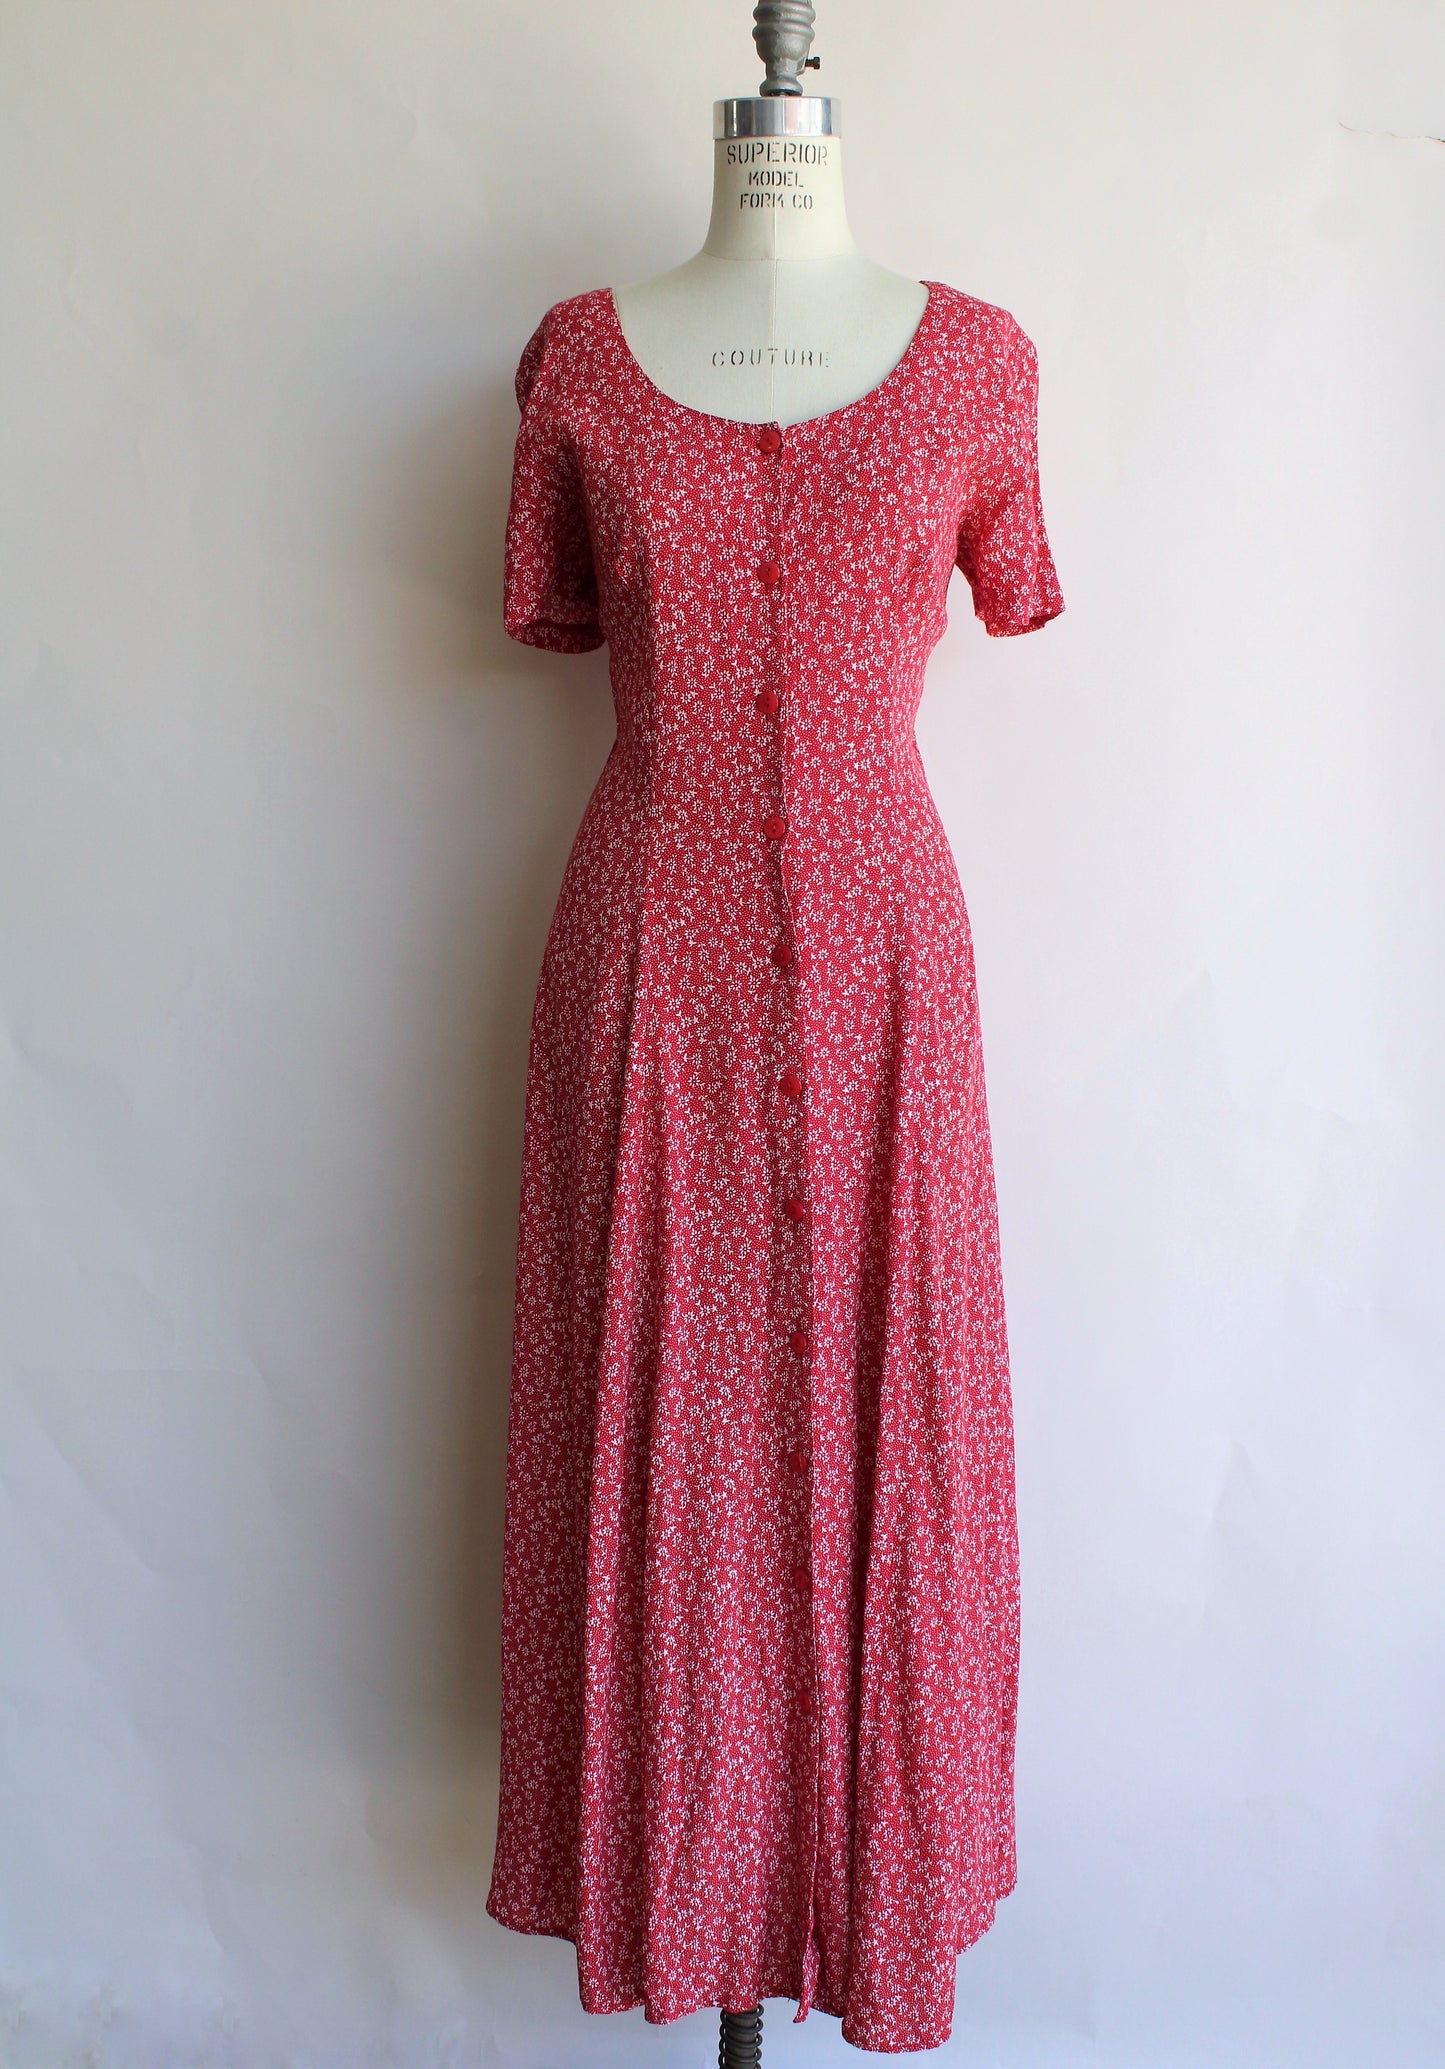 Vintage 1990s Red and White Country Floral Maxi Dress